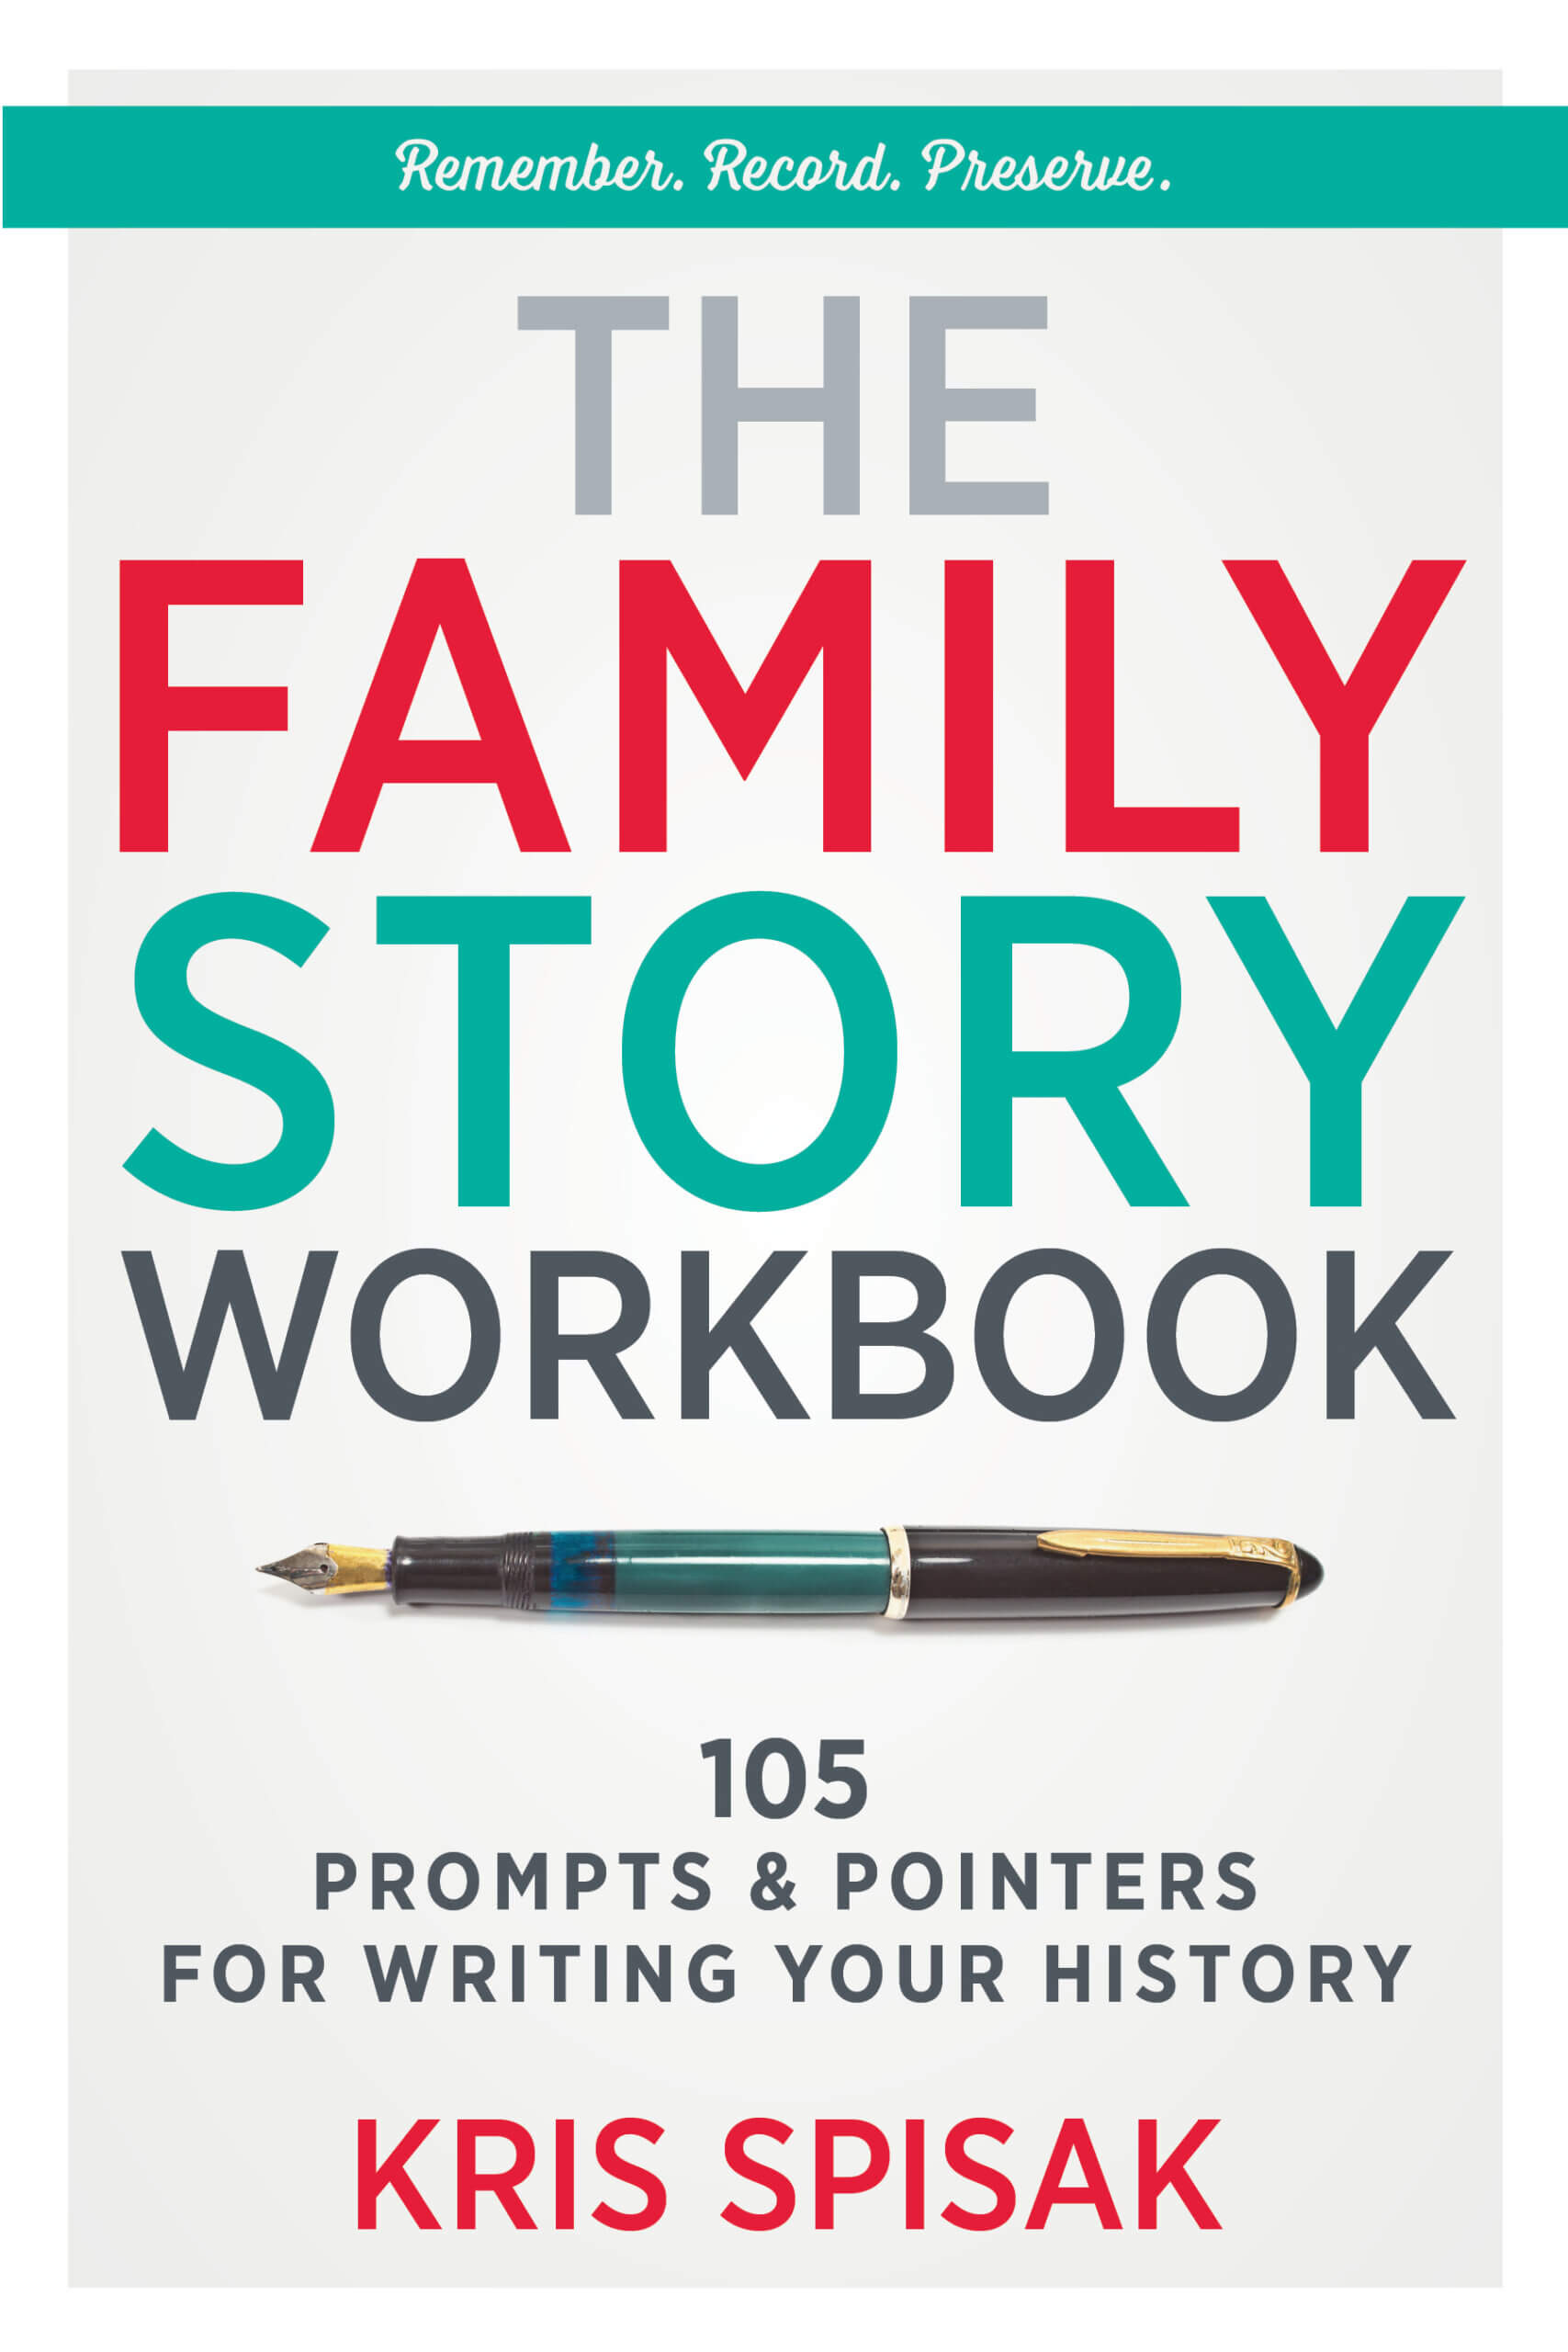 Ready to take your life story and family story recording even further?